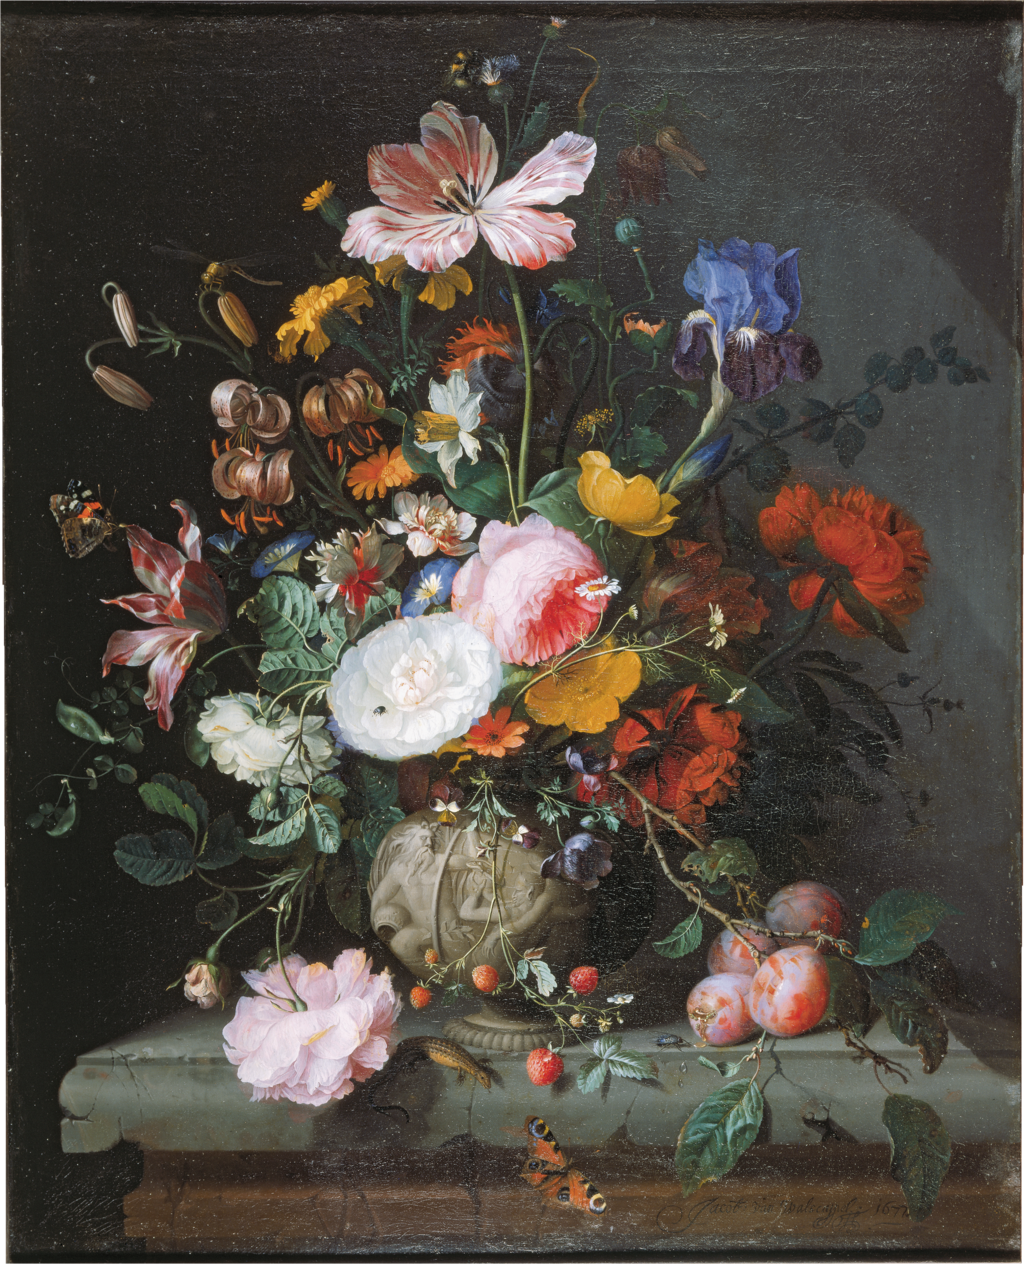 From the website of the Städel Museum: "Jacob van Walscapelle has arranged a luxuriant bouquet of flowers and a selection of fruits on a stone pedestal. We recognise the transience of nature in the wide-open blossoms and overripe fruits. A swarm of insects is accelerating the process of decay by sucking at them. By contrast, the stone vase with its mythological decor dating from antiquity is intended to represent the permanence of human artistic skills. But even this does not last forever, as the cracks and traces of age on the stone pedestal show as a symbol of transience."